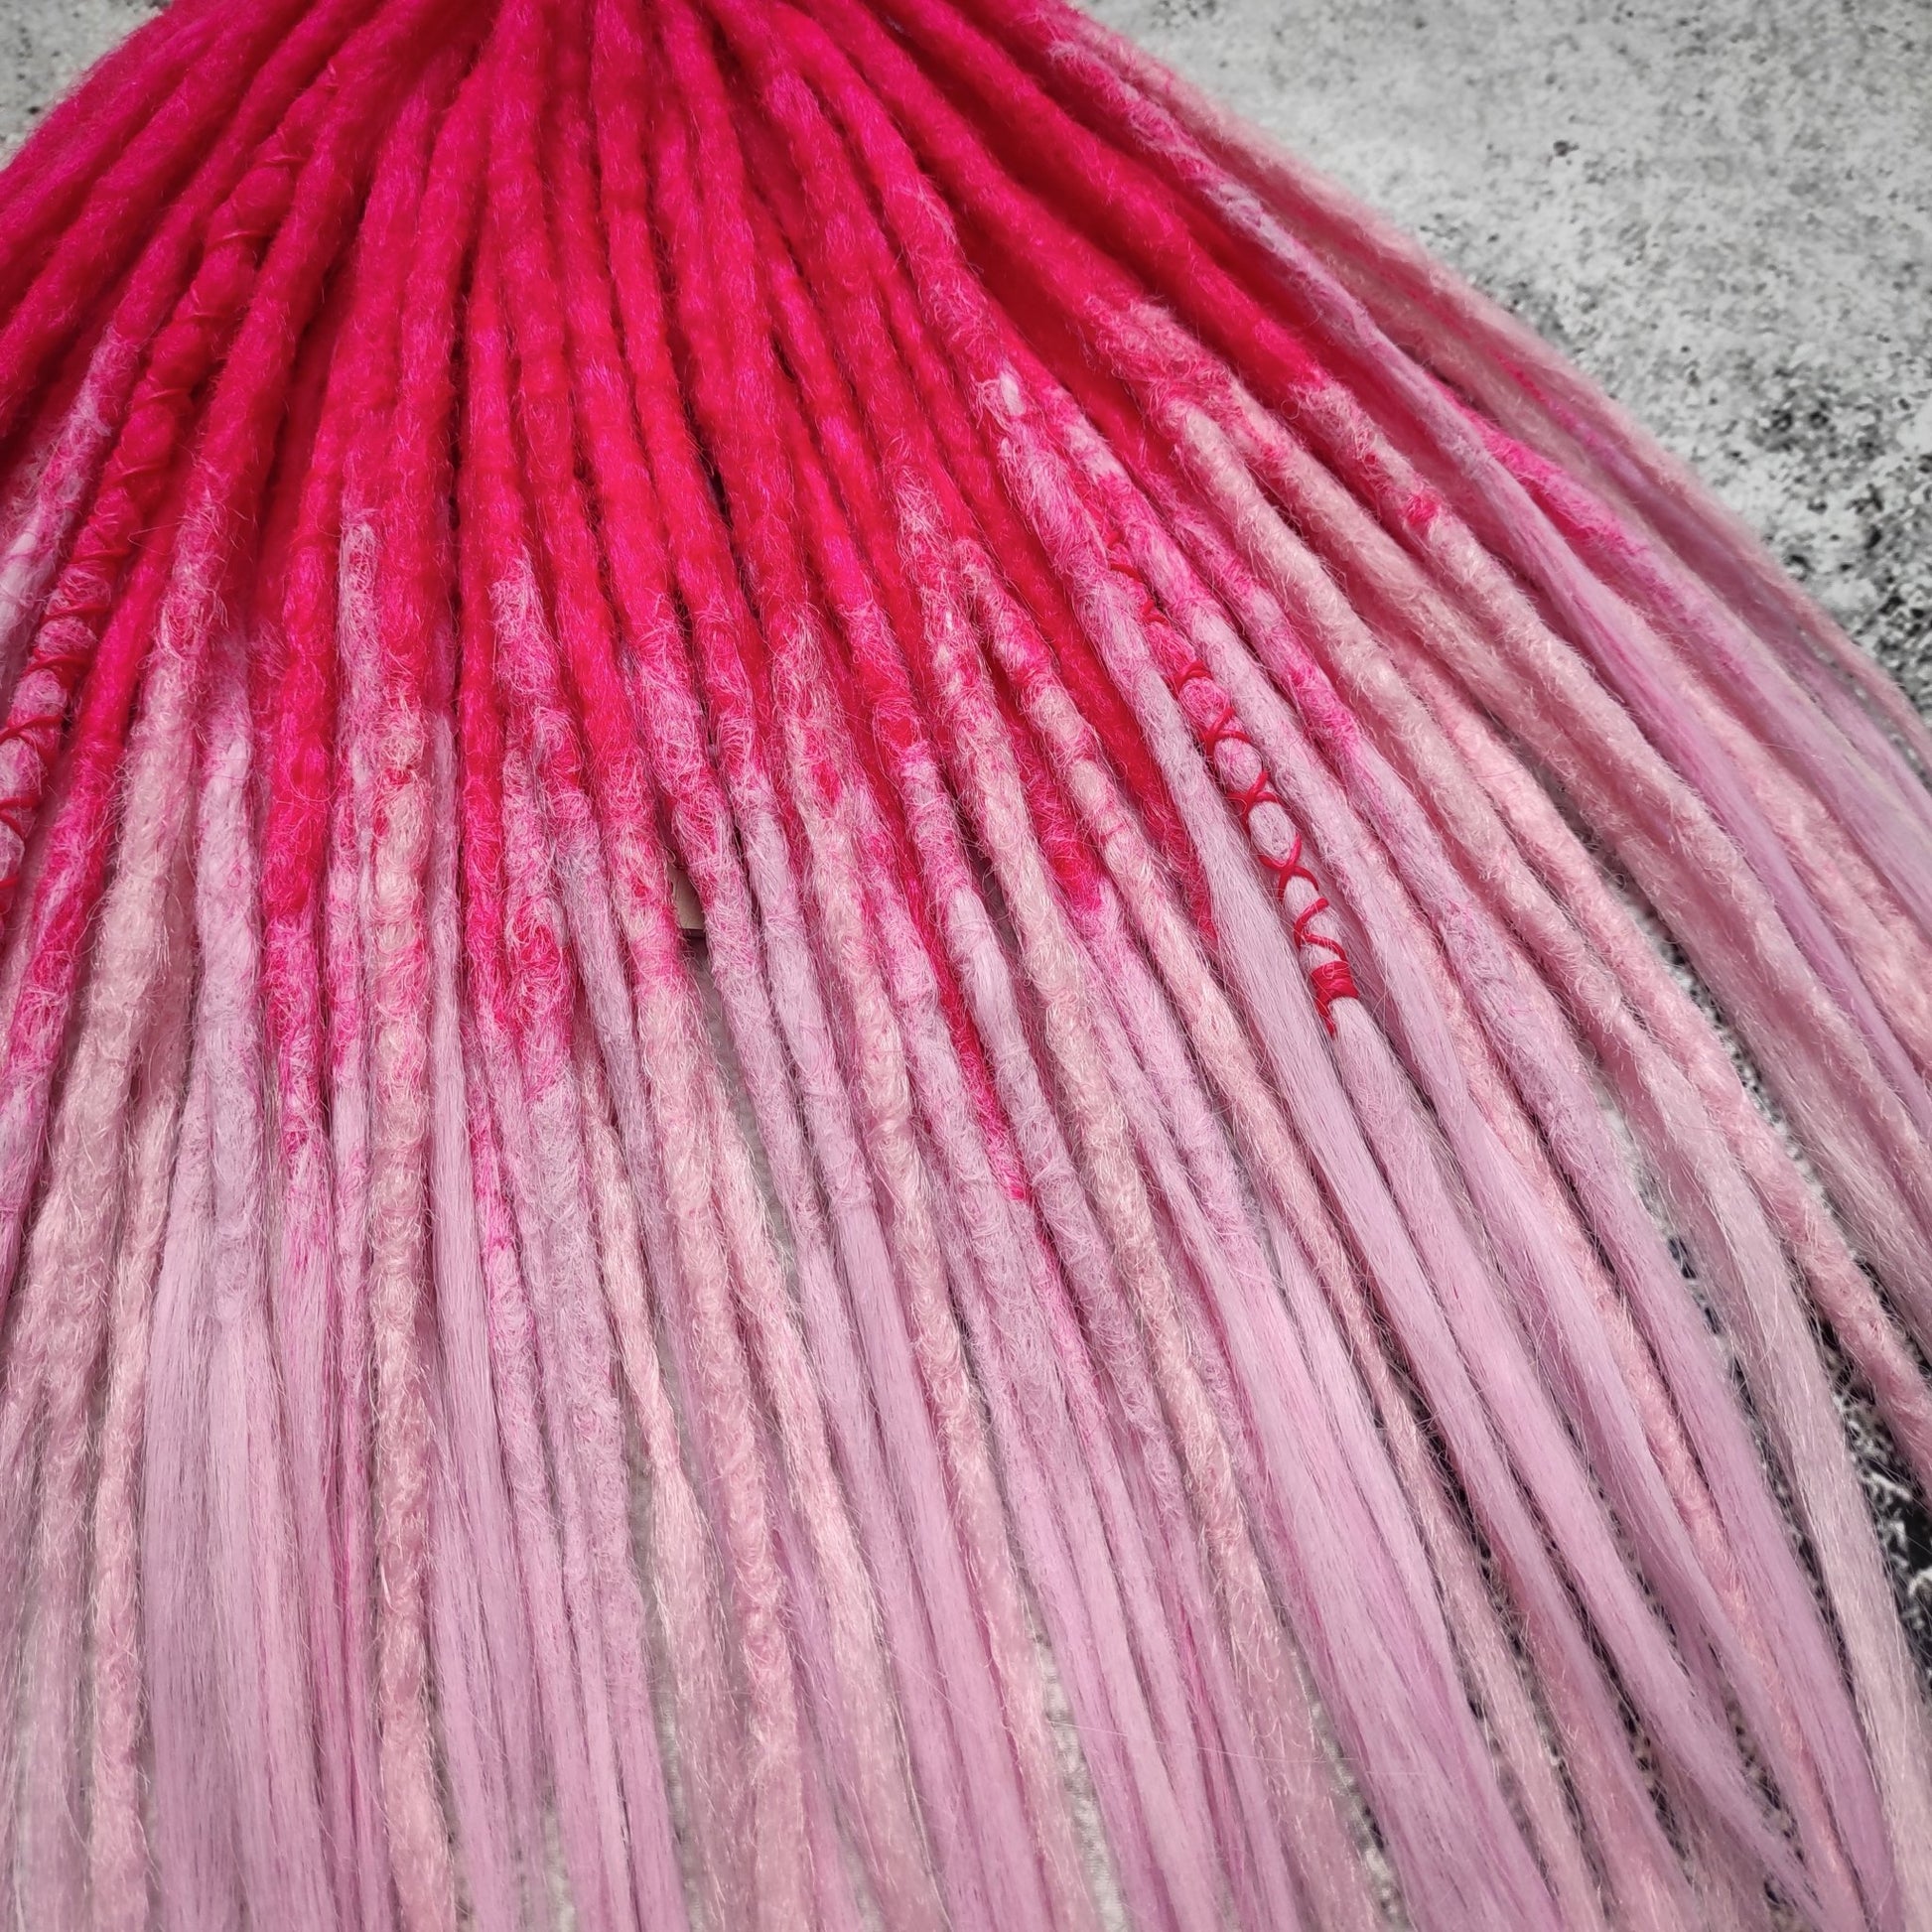 Synthetic double-ended dreads with a pink ombre effect